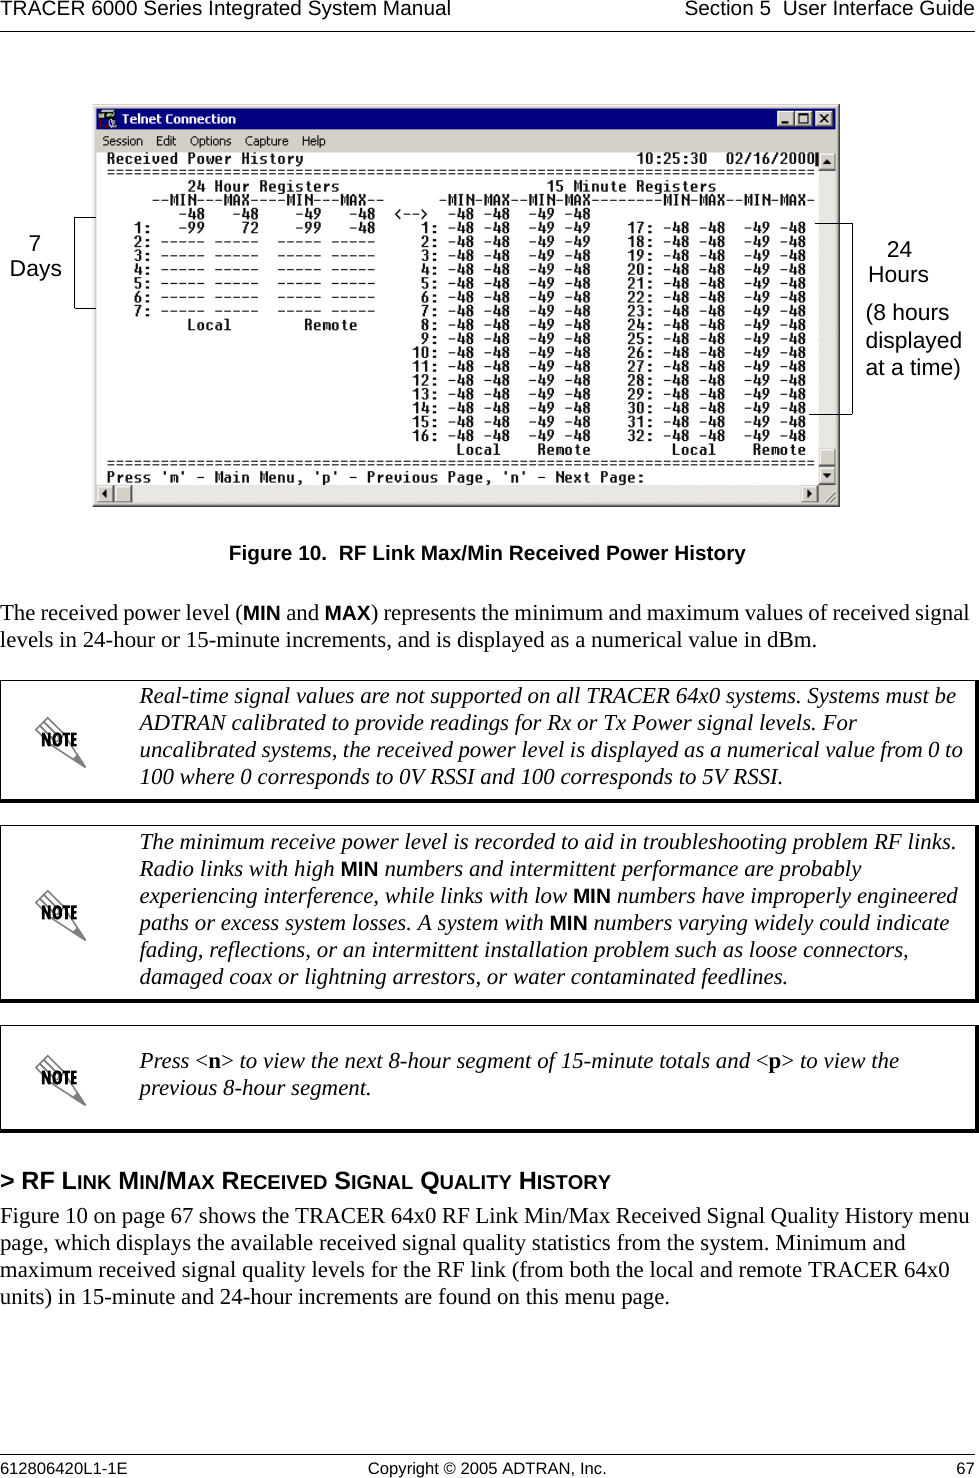 TRACER 6000 Series Integrated System Manual Section 5  User Interface Guide612806420L1-1E Copyright © 2005 ADTRAN, Inc. 67Figure 10.  RF Link Max/Min Received Power HistoryThe received power level (MIN and MAX) represents the minimum and maximum values of received signal levels in 24-hour or 15-minute increments, and is displayed as a numerical value in dBm.&gt; RF LINK MIN/MAX RECEIVED SIGNAL QUALITY HISTORYFigure 10 on page 67 shows the TRACER 64x0 RF Link Min/Max Received Signal Quality History menu page, which displays the available received signal quality statistics from the system. Minimum and maximum received signal quality levels for the RF link (from both the local and remote TRACER 64x0 units) in 15-minute and 24-hour increments are found on this menu page.Real-time signal values are not supported on all TRACER 64x0 systems. Systems must be ADTRAN calibrated to provide readings for Rx or Tx Power signal levels. For uncalibrated systems, the received power level is displayed as a numerical value from 0 to 100 where 0 corresponds to 0V RSSI and 100 corresponds to 5V RSSI.The minimum receive power level is recorded to aid in troubleshooting problem RF links. Radio links with high MIN numbers and intermittent performance are probably experiencing interference, while links with low MIN numbers have improperly engineered paths or excess system losses. A system with MIN numbers varying widely could indicate fading, reflections, or an intermittent installation problem such as loose connectors, damaged coax or lightning arrestors, or water contaminated feedlines.Press &lt;n&gt; to view the next 8-hour segment of 15-minute totals and &lt;p&gt; to view the previous 8-hour segment.7Days 24Hours(8 hours displayed at a time)